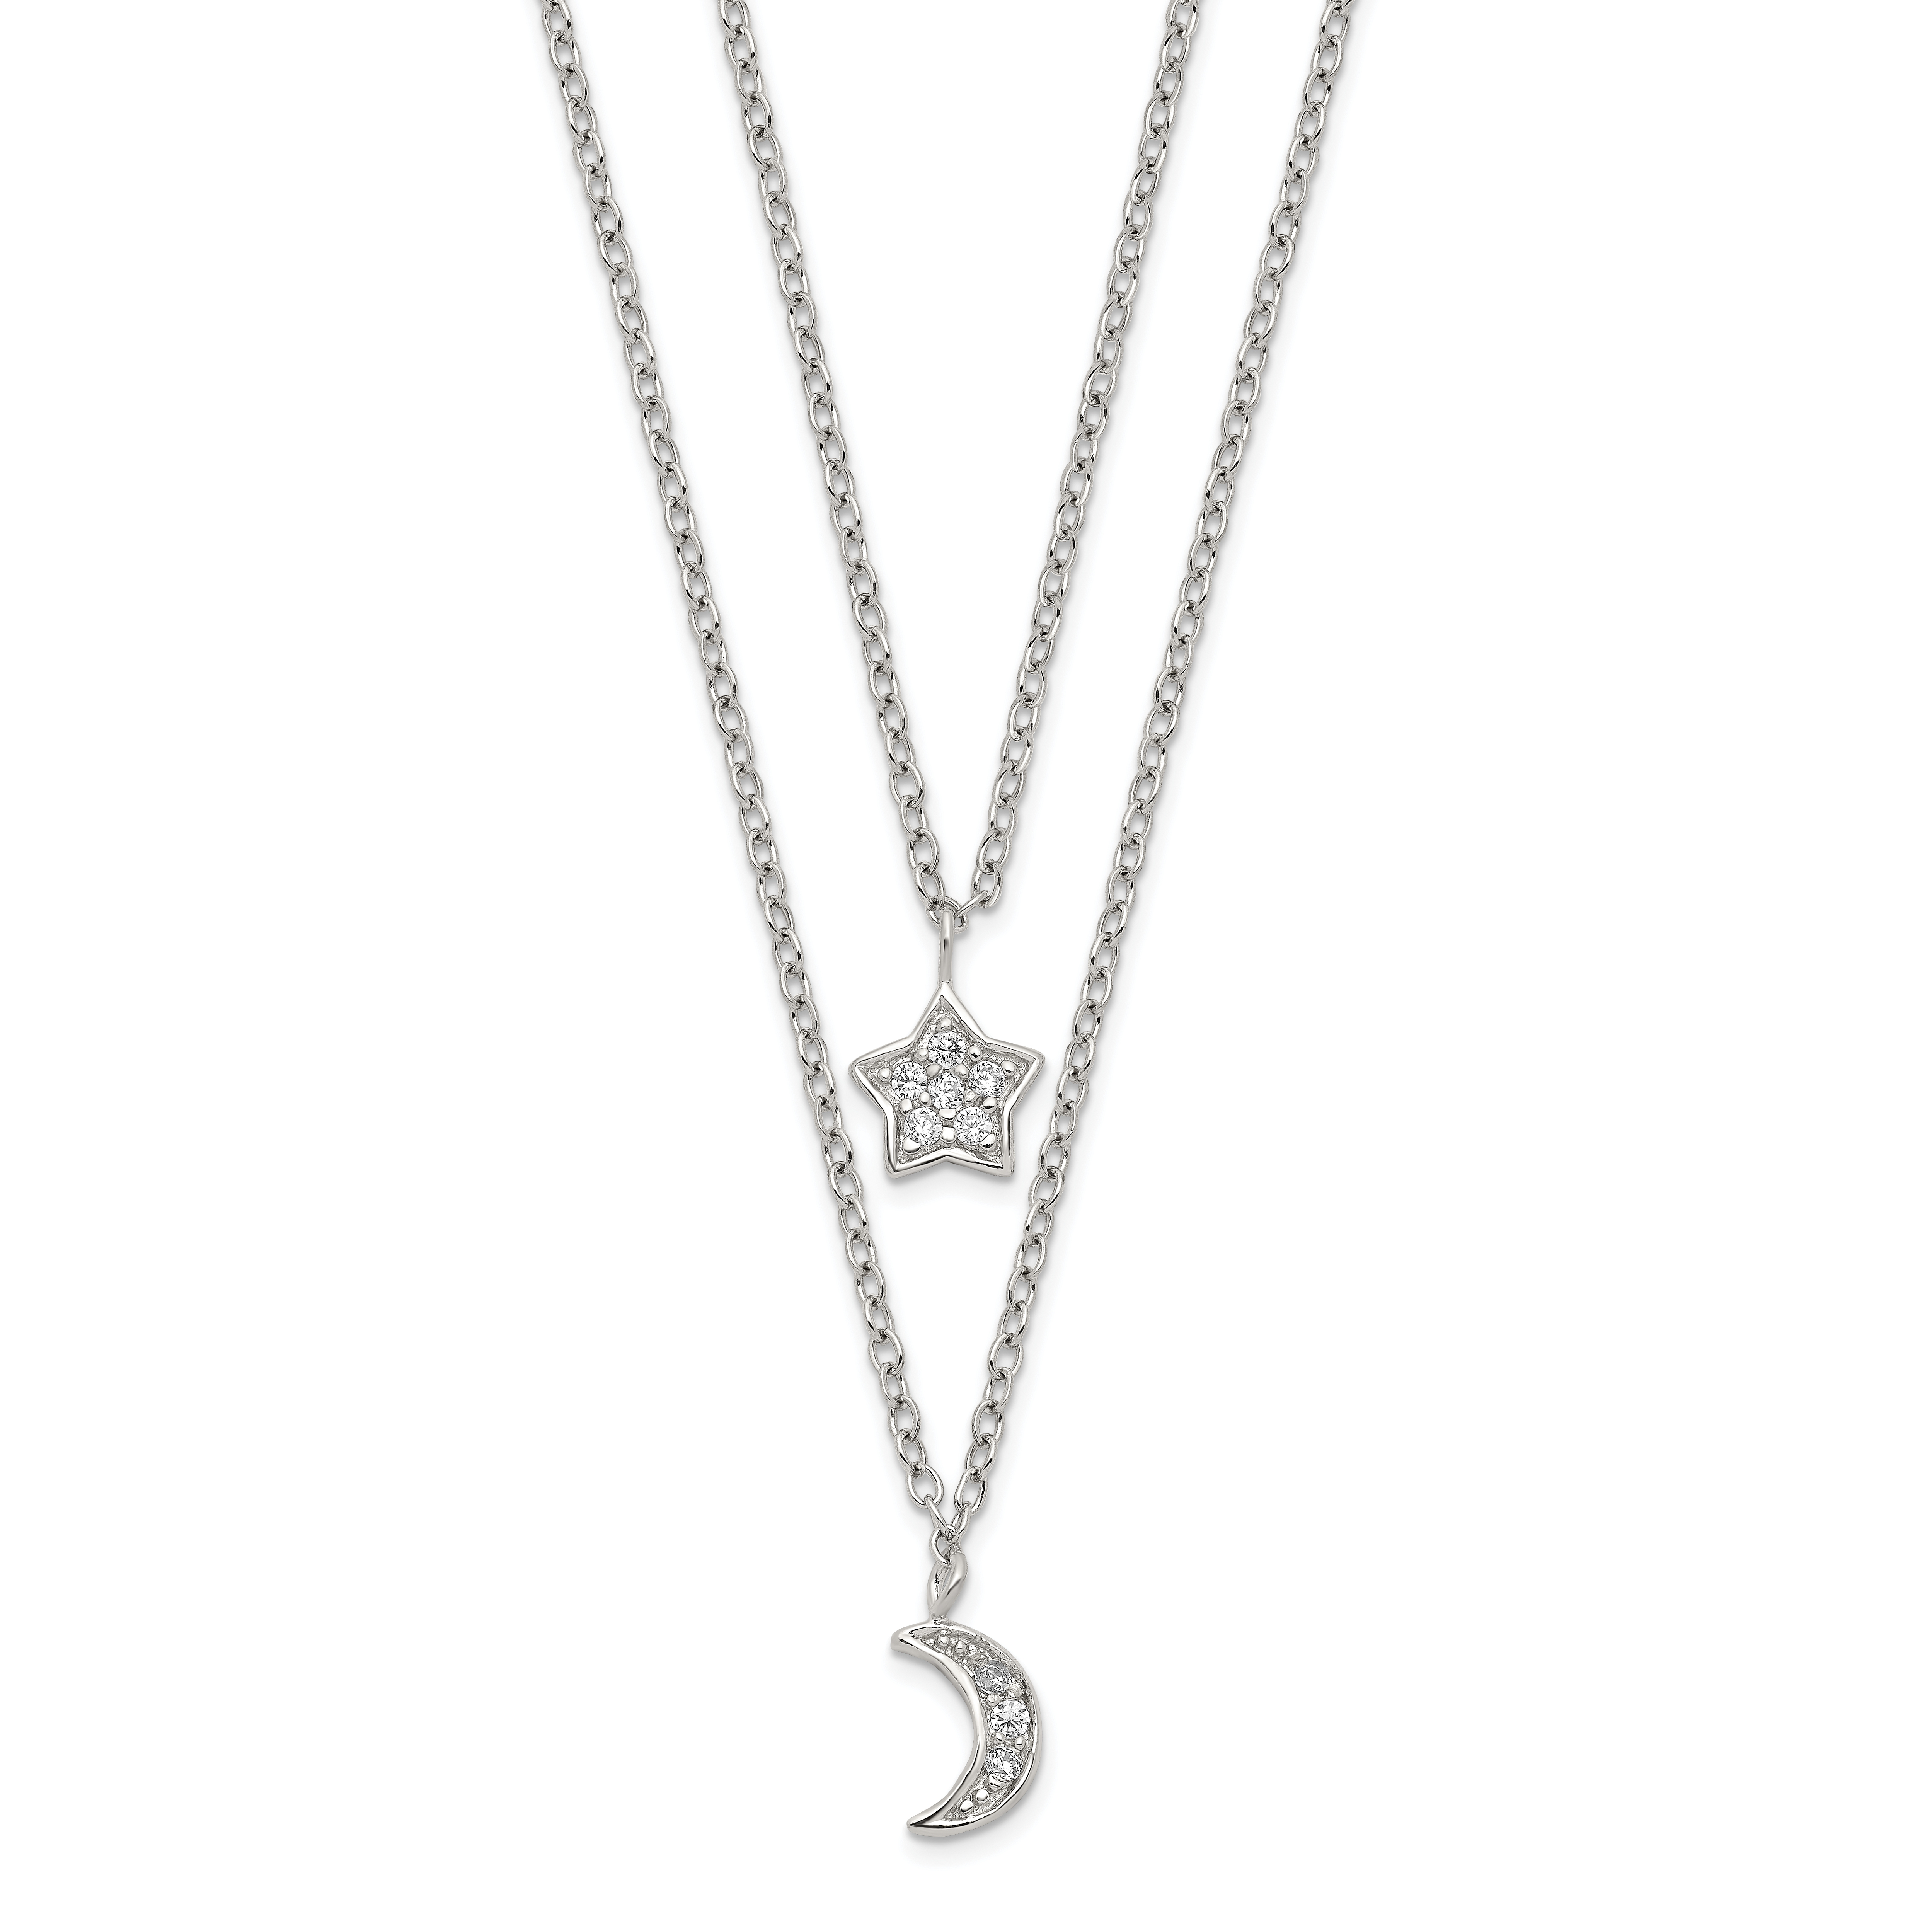 Jewelry Necklaces Necklace with Pendants Sterling Silver Rhodium-plated MOP Tree with CZ with 2in ext Necklace 